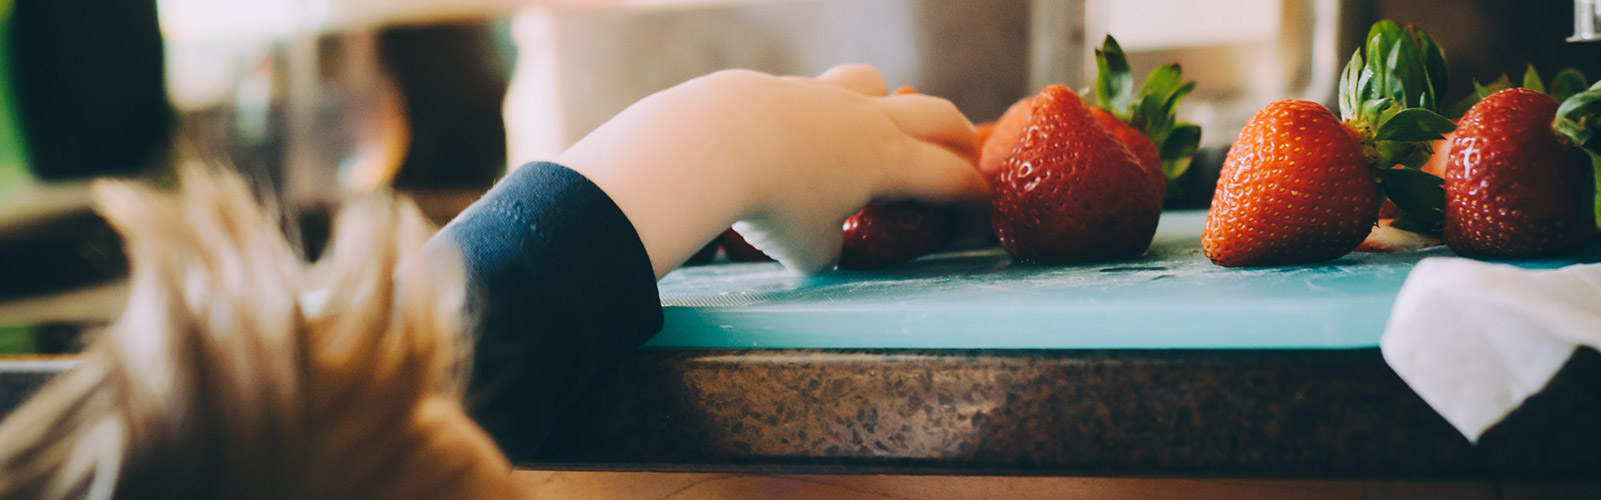 Child reaches for strawberries on kitchen counter